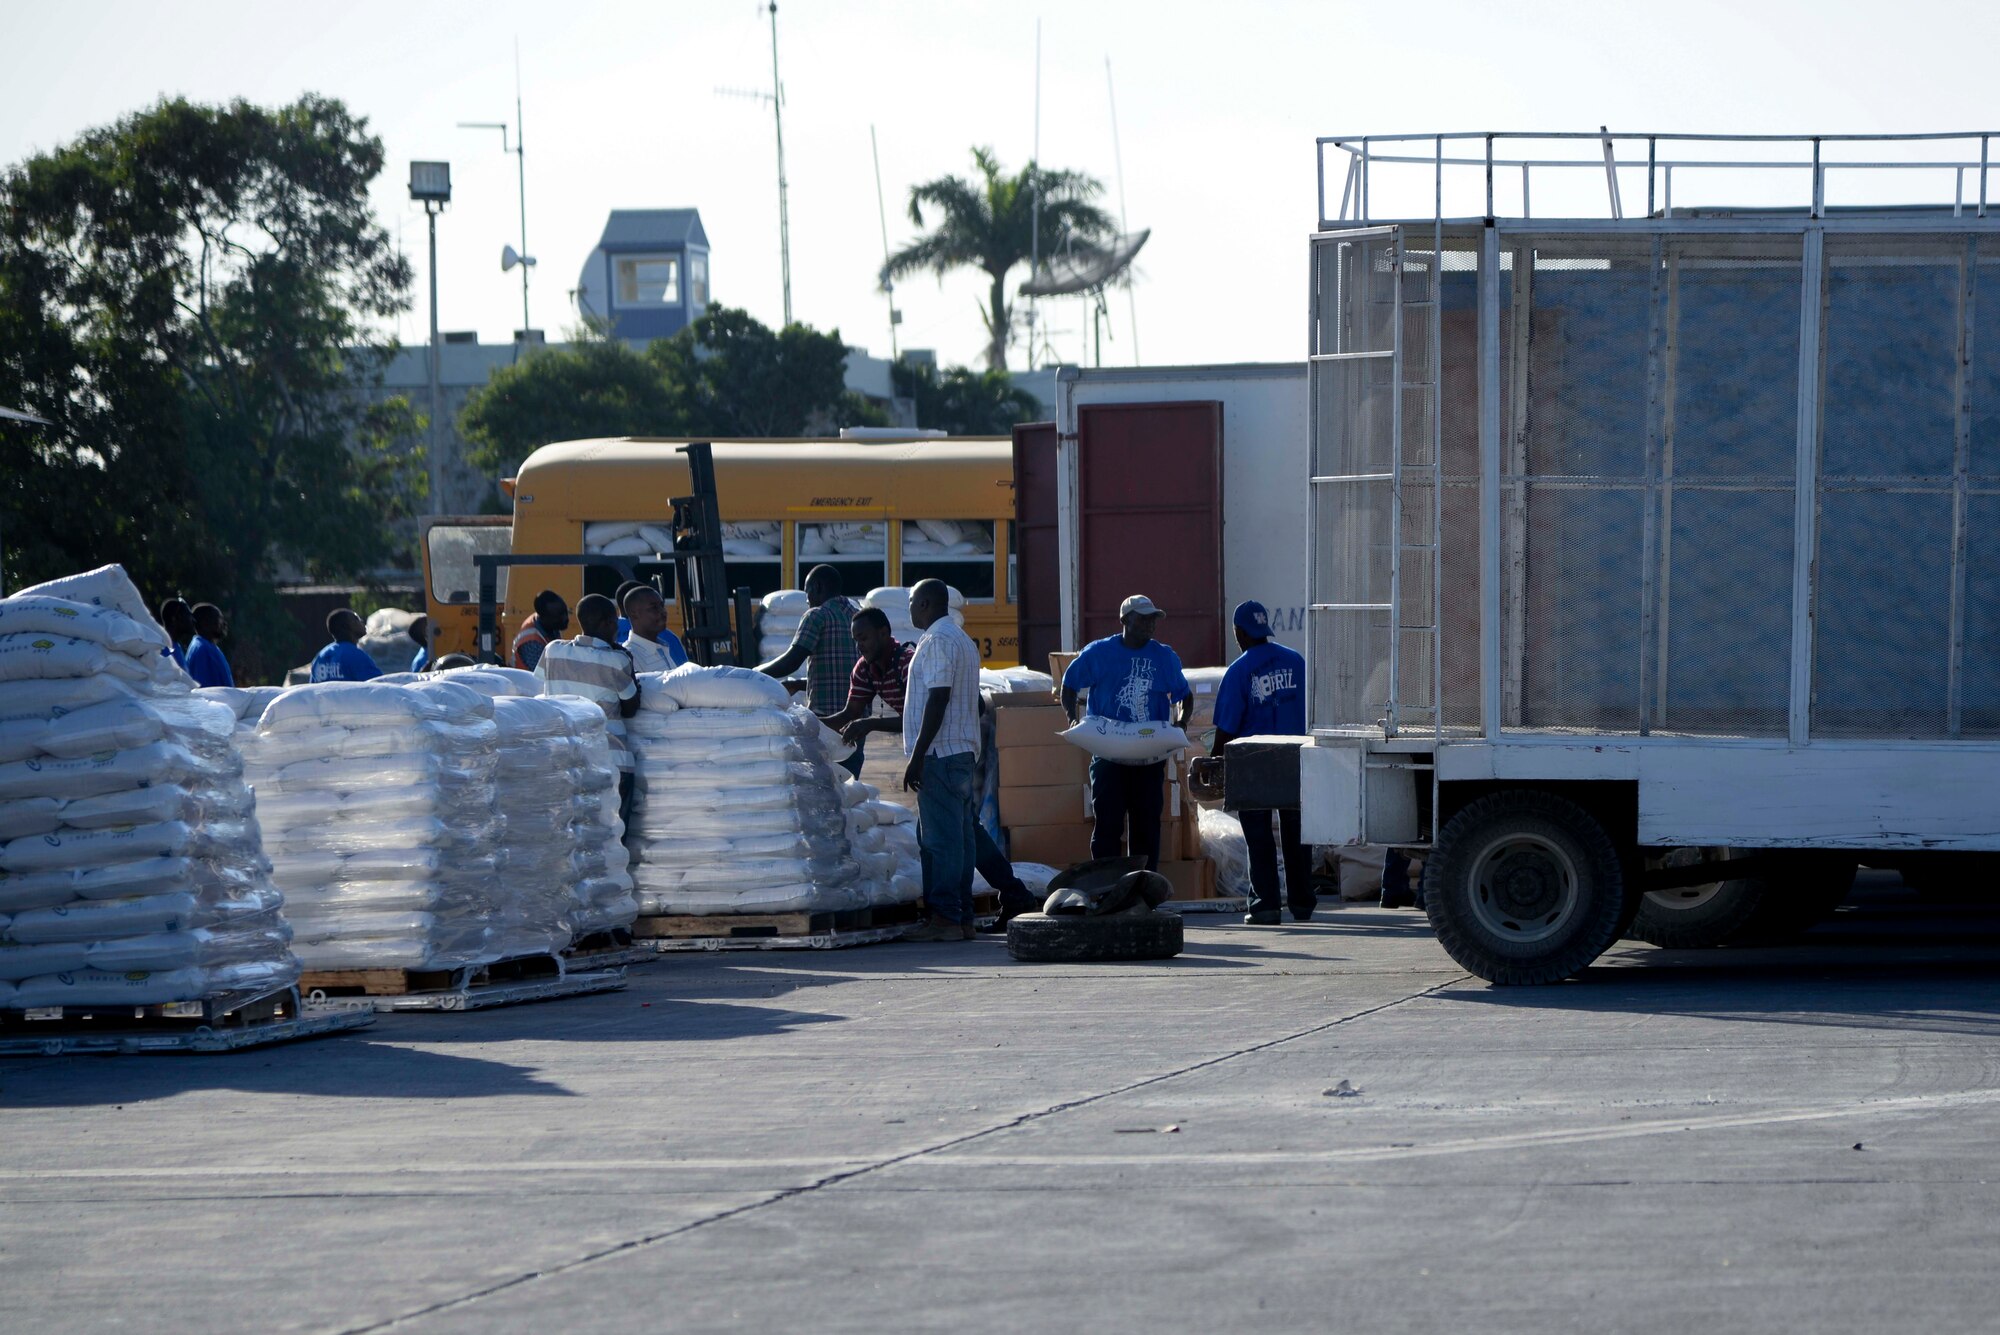 Port-au-Prince, Haiti – Haitian citizens load trucks with sacks of rice at Port-au-Prince, Haiti Dec. 19, 2013. Airmen assigned to the 97th Air Mobility Wing delivered 136,000 pounds of rice, beans and corn meal provided by Operation Ukraine, a non-profit relief organization that collects and distributes supplies around the world. (U.S. Air Force photo by Airman 1st Class Klynne Pearl Serrano/Released)